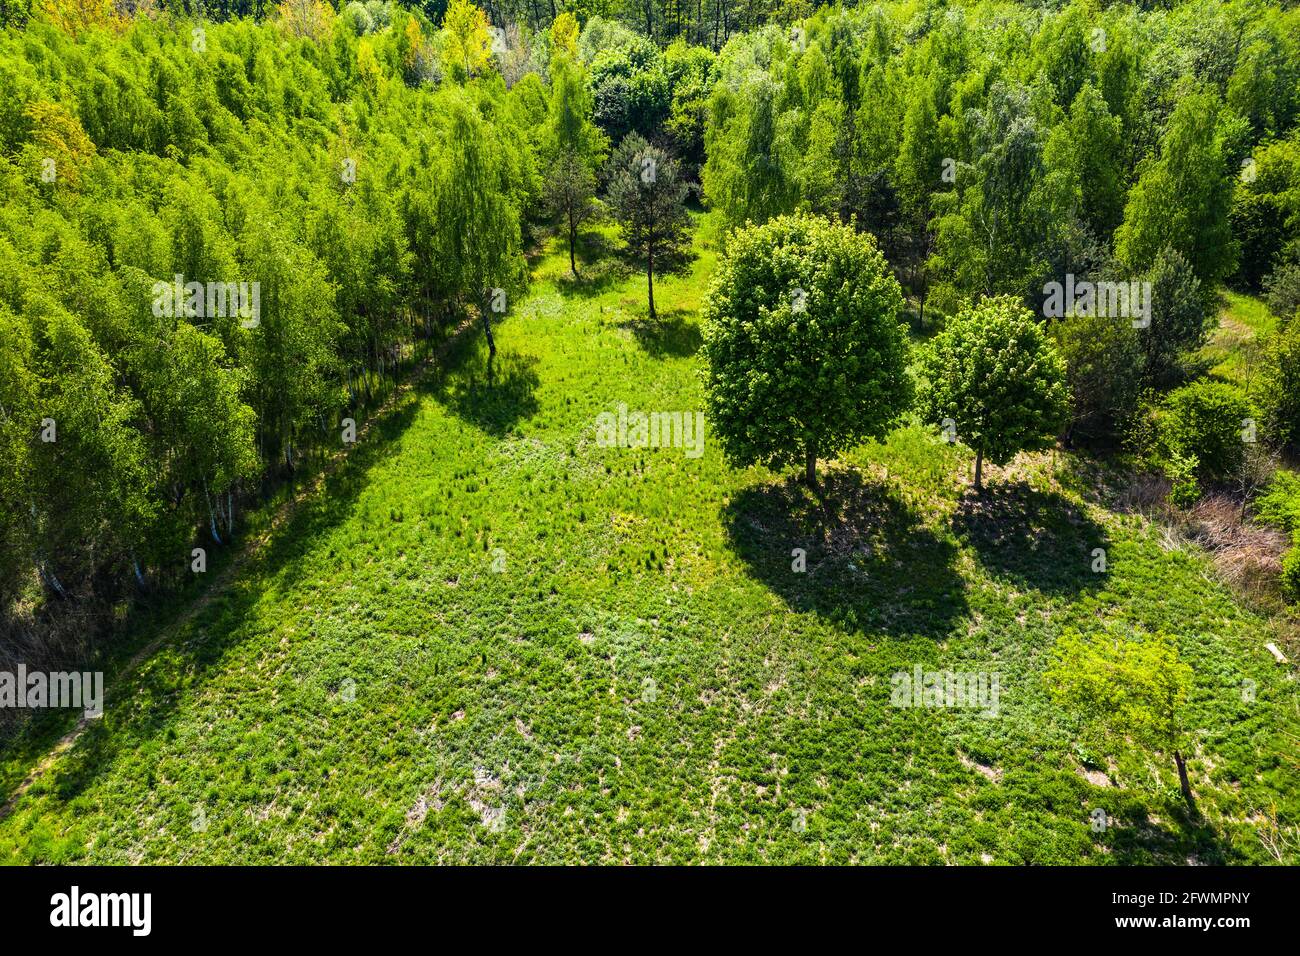 Top down view of an evergreen forest in early summer with a dirt Stock Photo